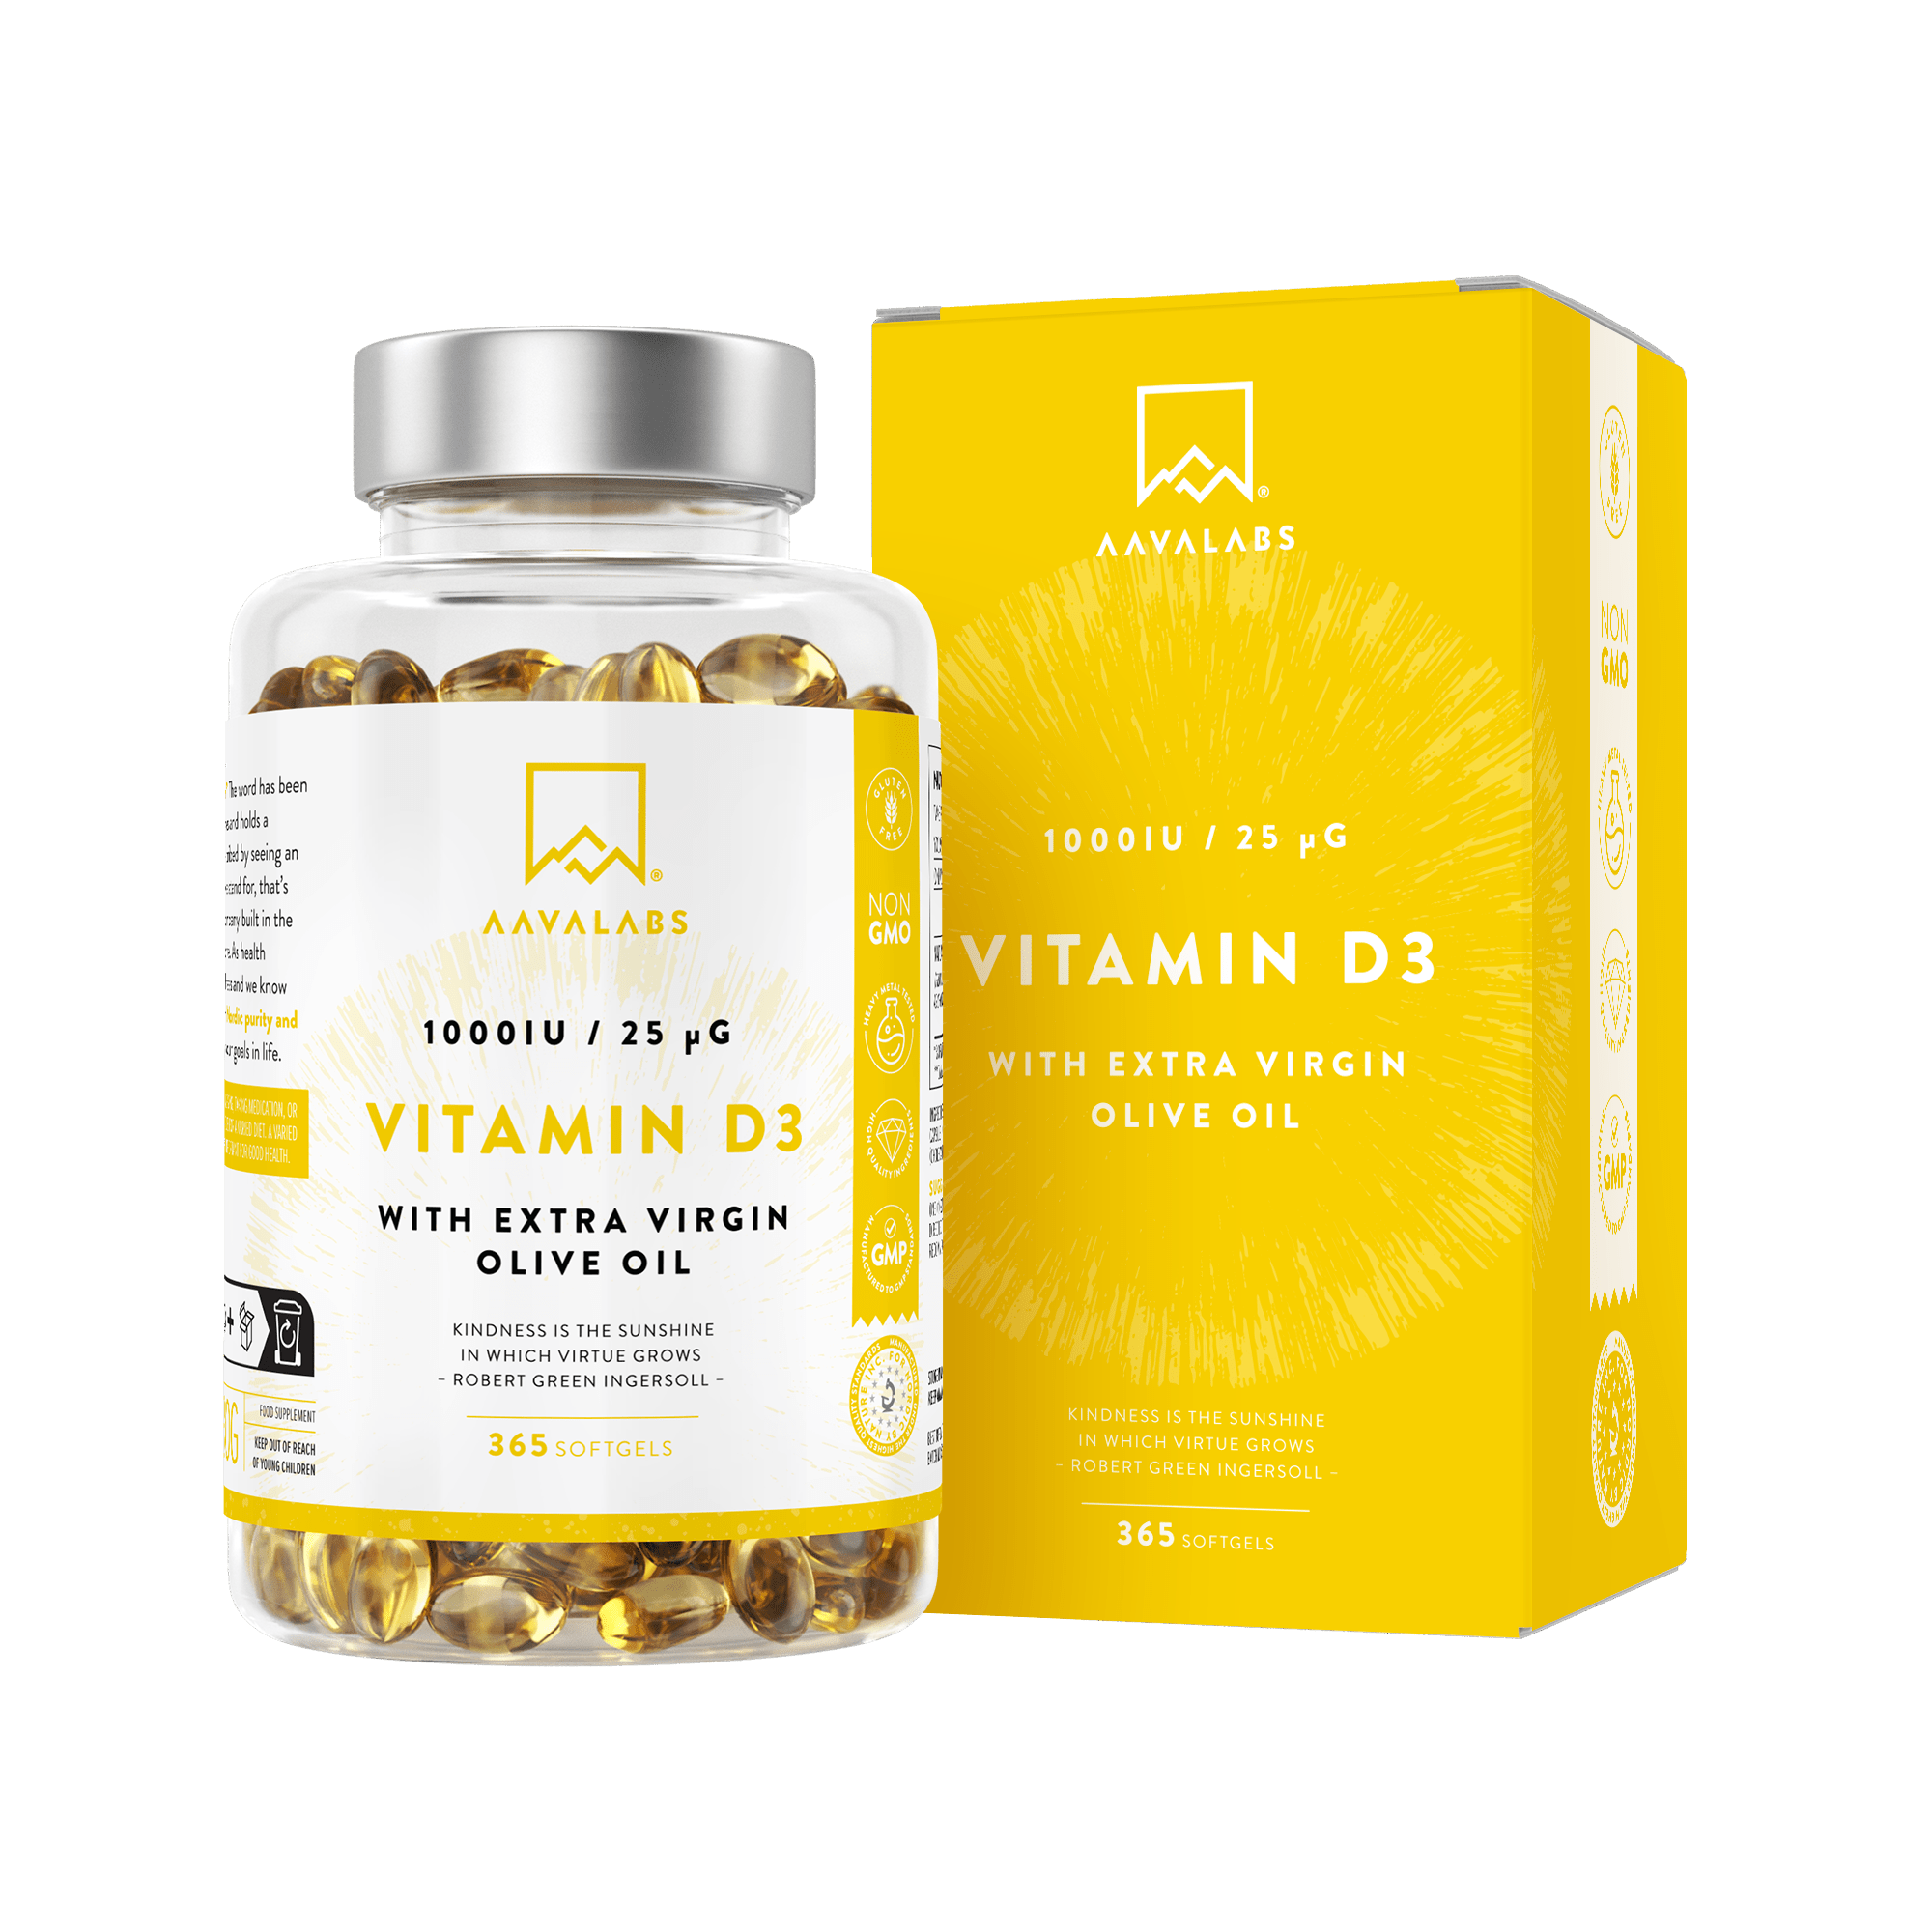 Bottle of Vitamin D3 1000 IU with extra virgin olive oil and packaging box - AAVALABS